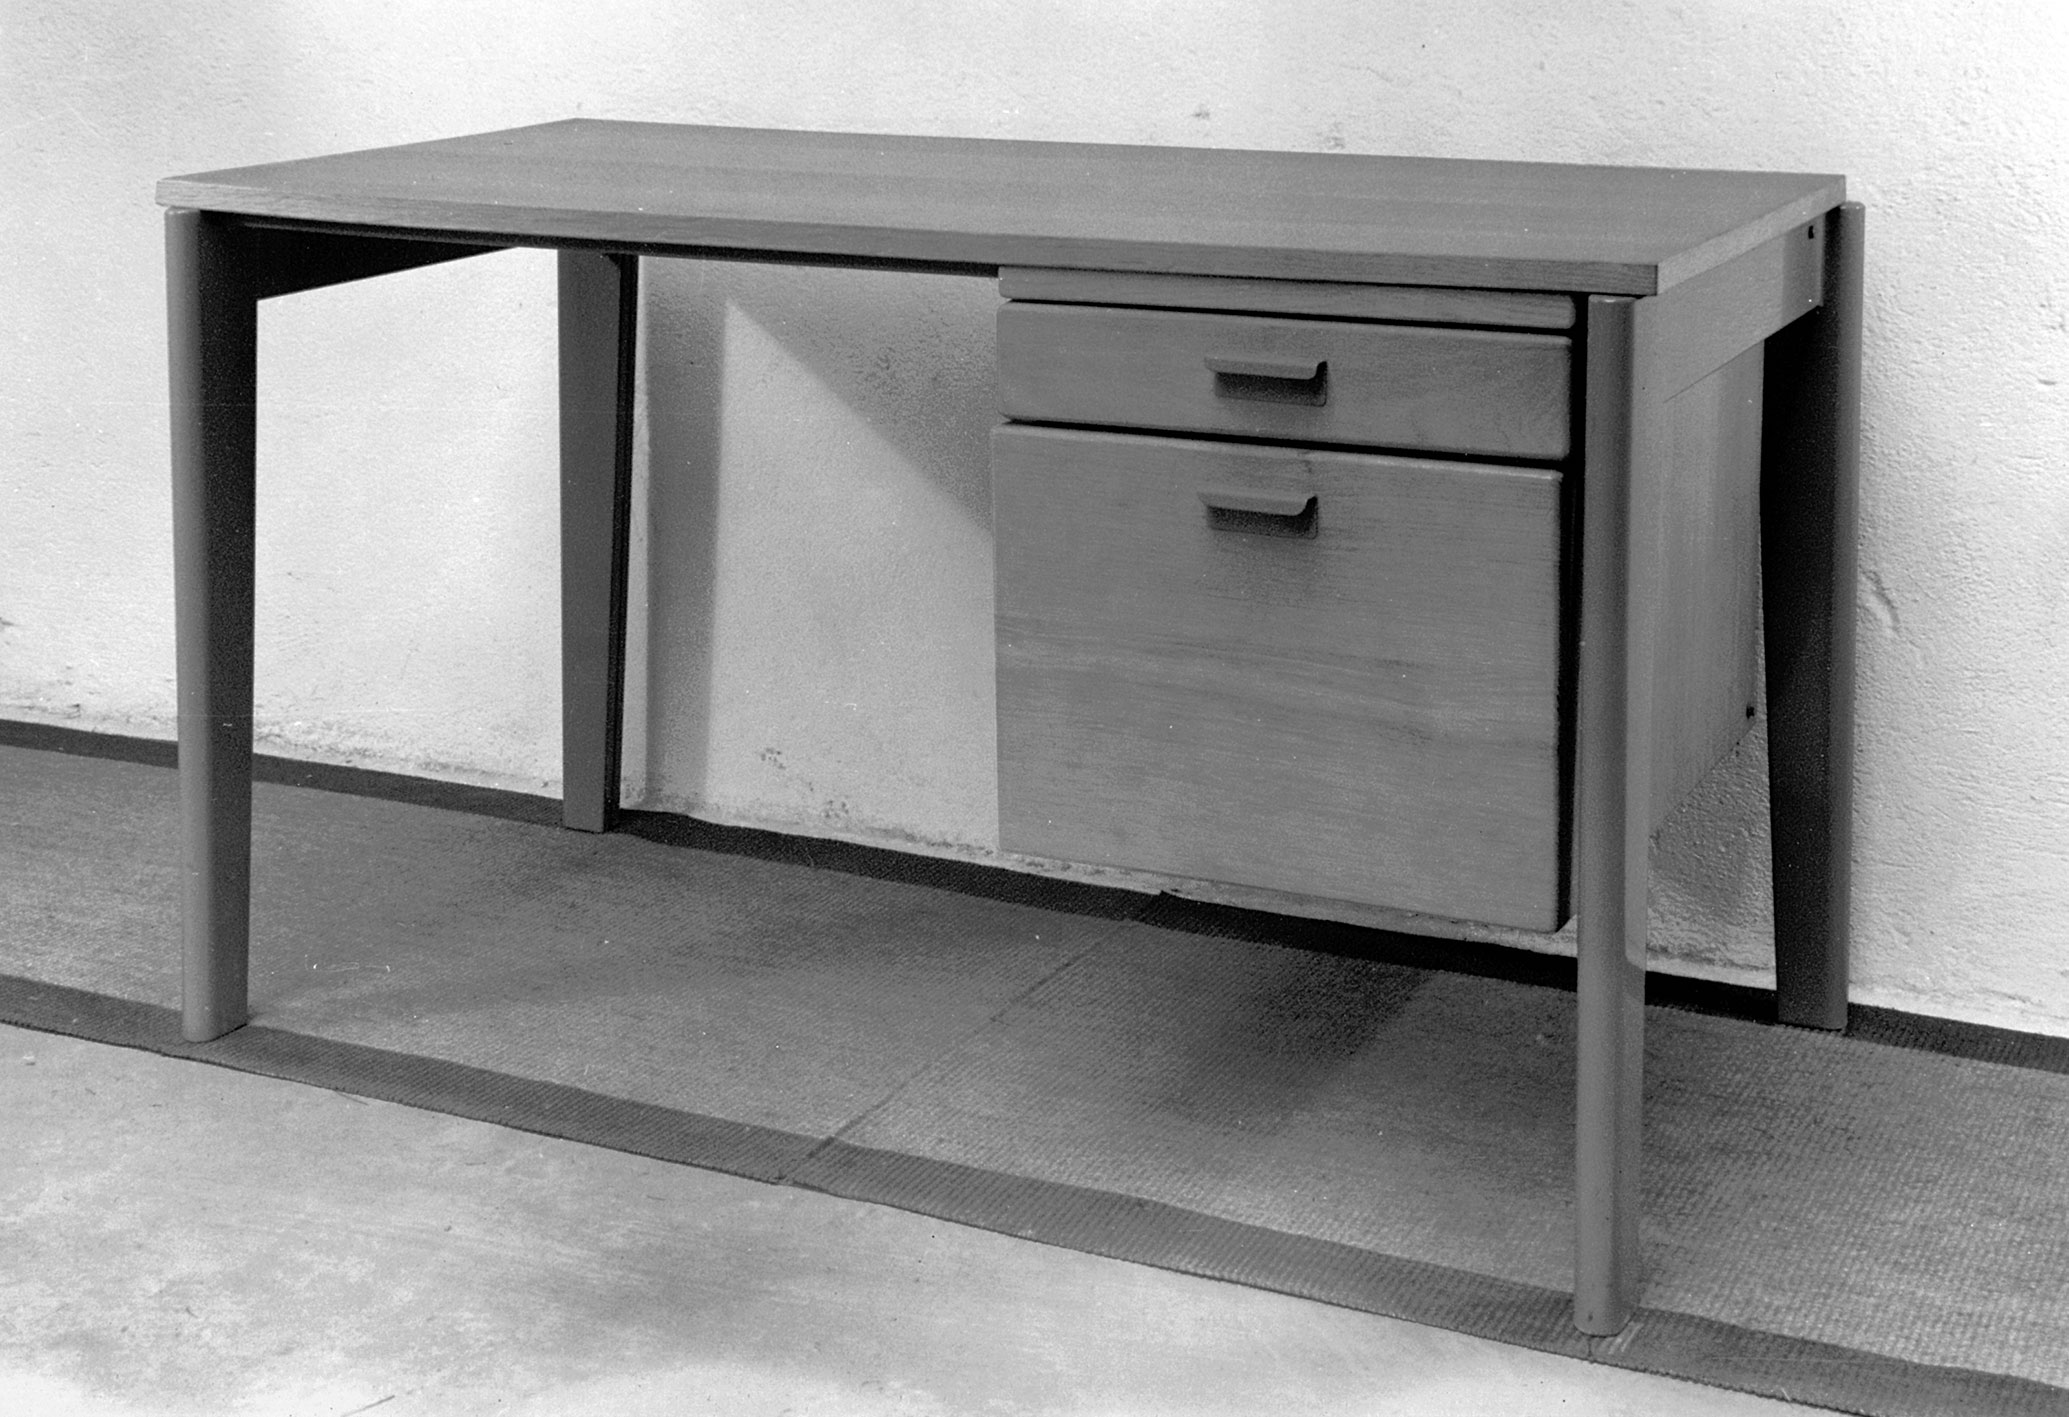 Dactylo BD 41 table-desk, 1946. View in the workshop, ca. 1948.